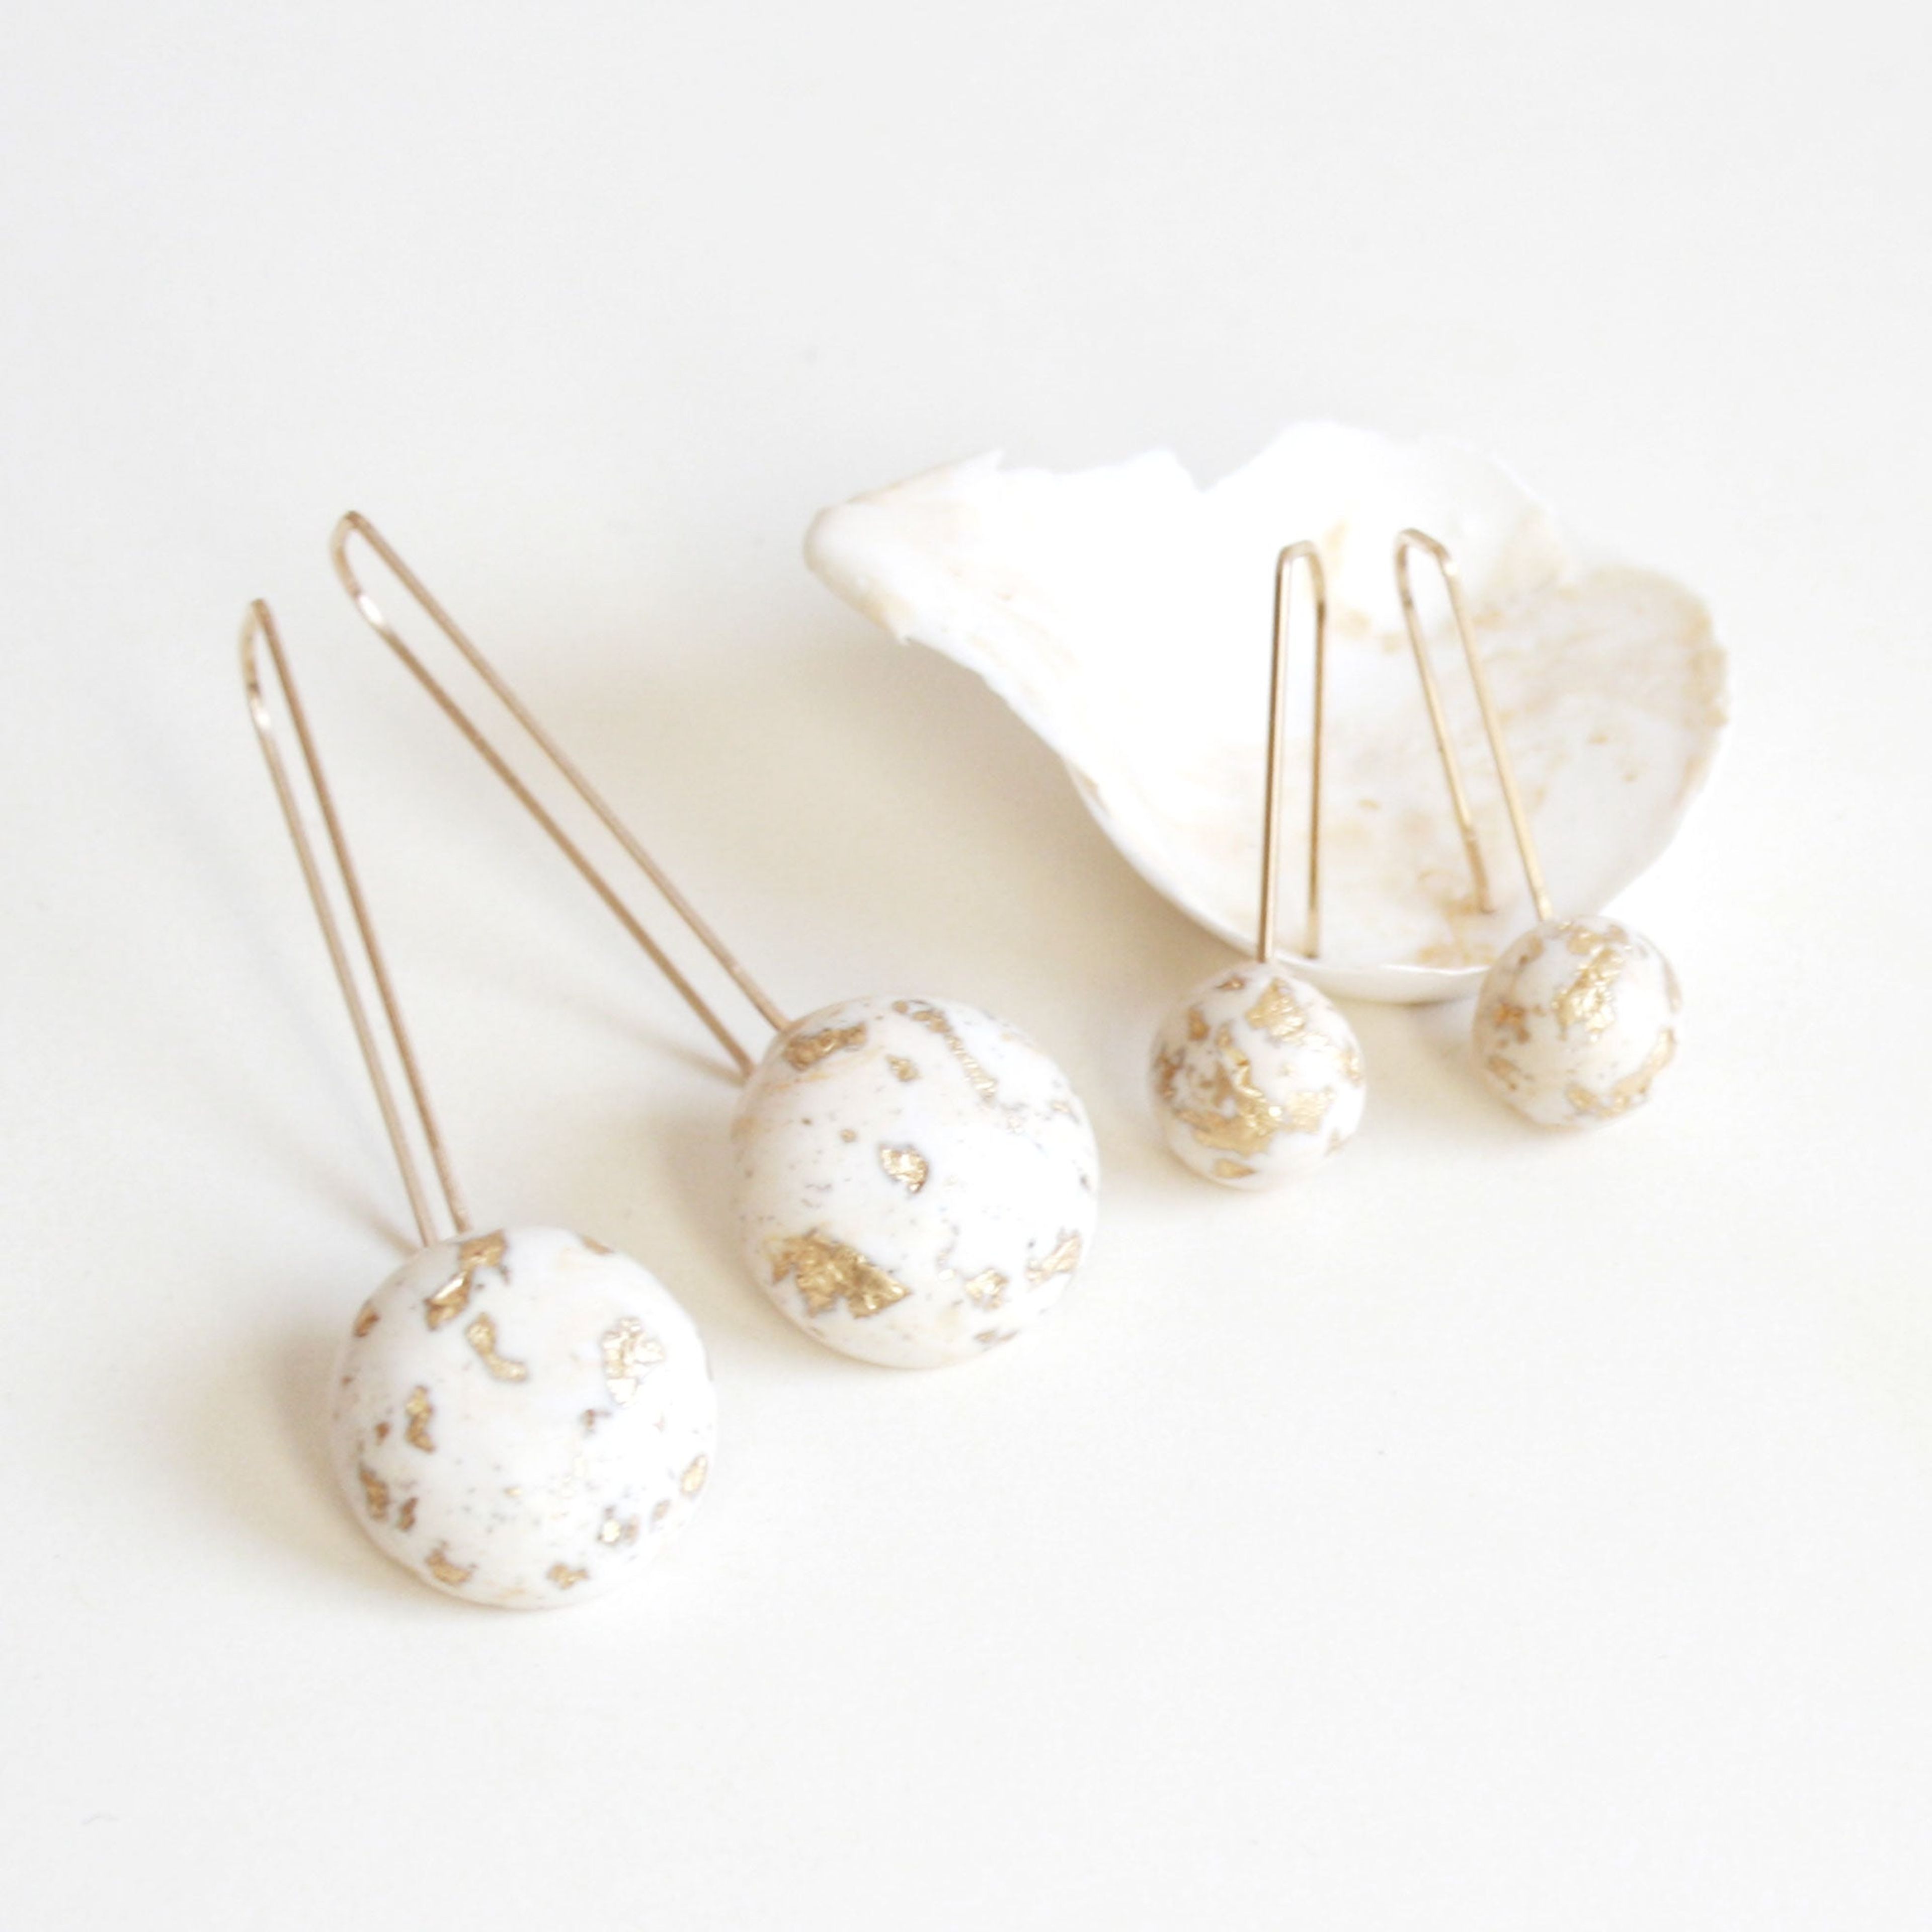 Large White Dome Earrings with Gold Flakes